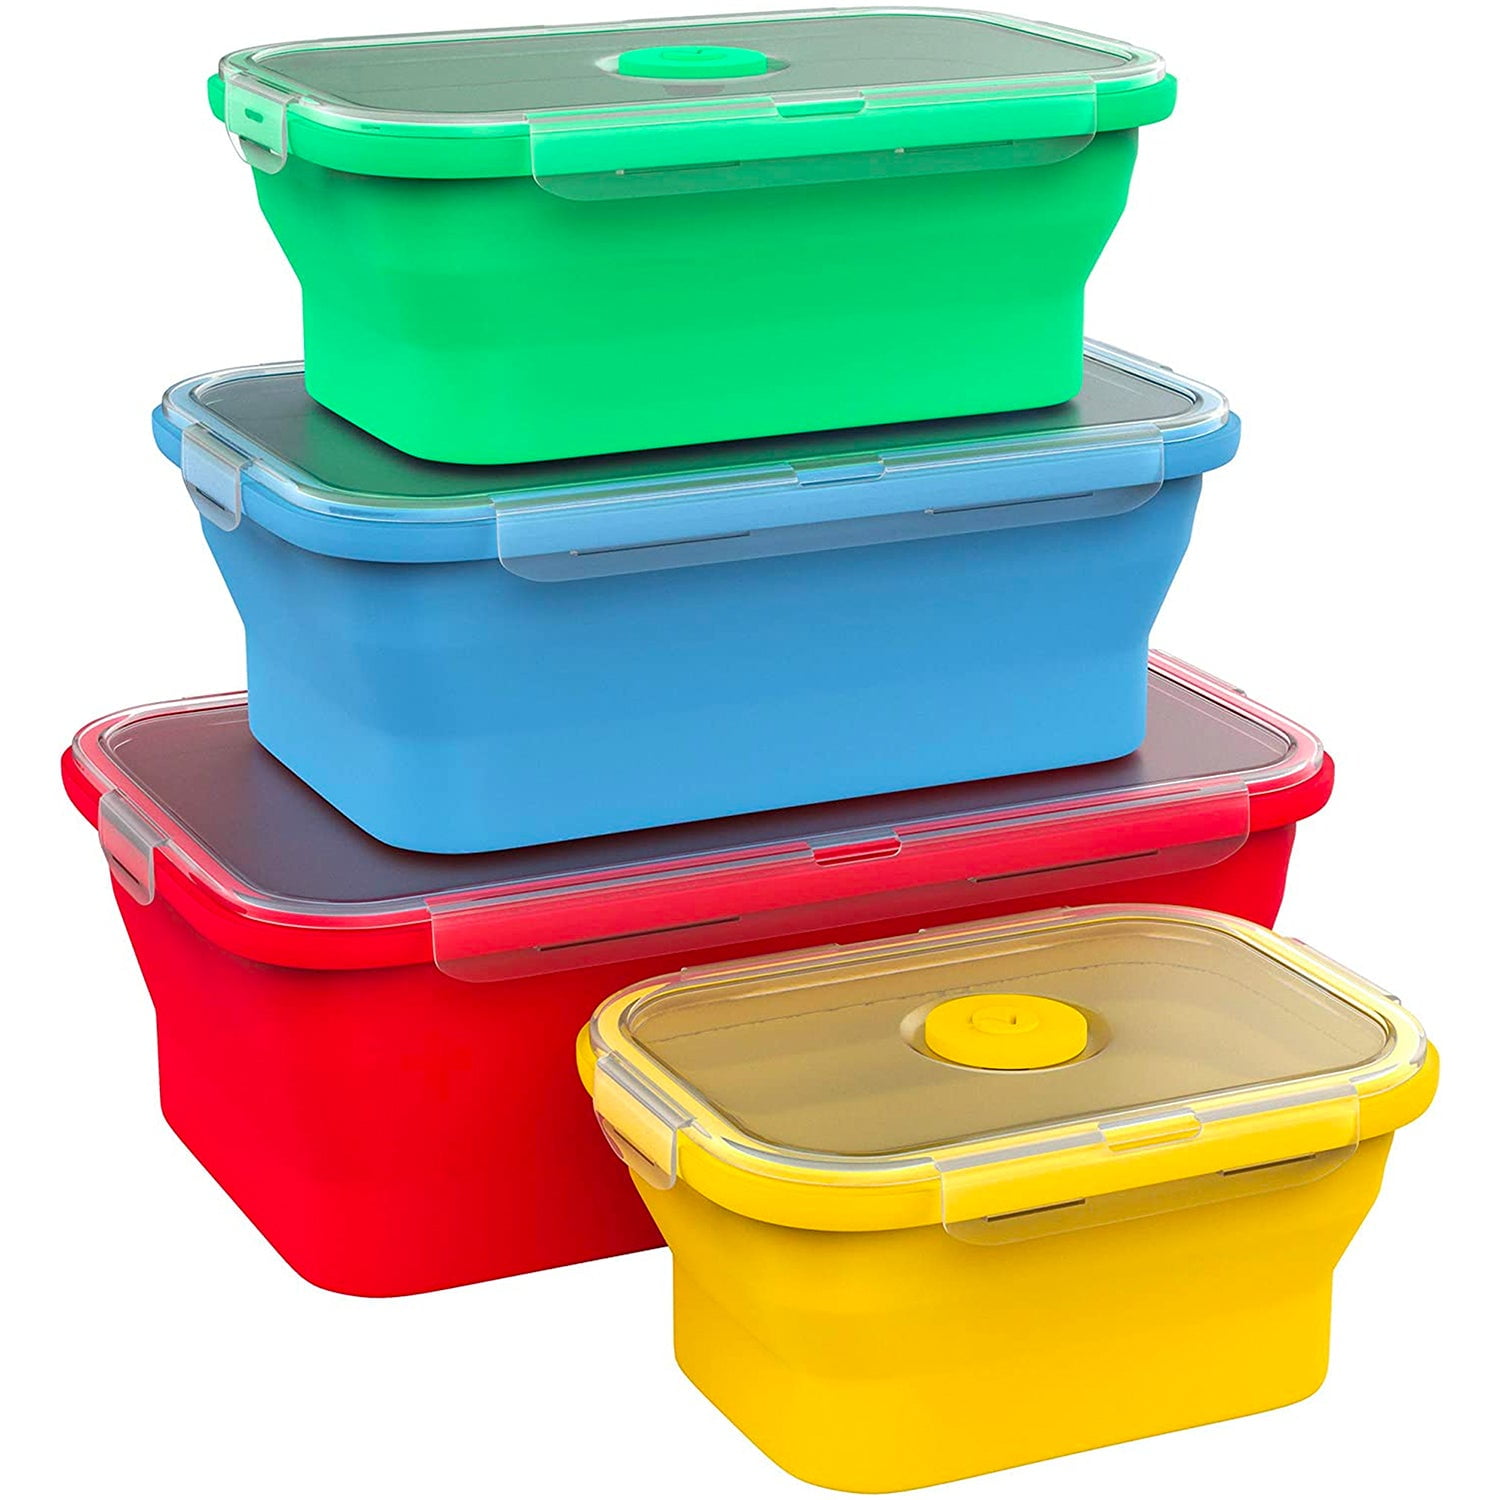 er nok Uplifted Med det samme Vremi Silicone Food Storage Containers with BPA Free Airtight Plastic Lids  - Set of 4 Small and Large Collapsible Meal Prep Container for Kitchen  Lunch Boxes - Microwave and Freezer Safe - Walmart.com